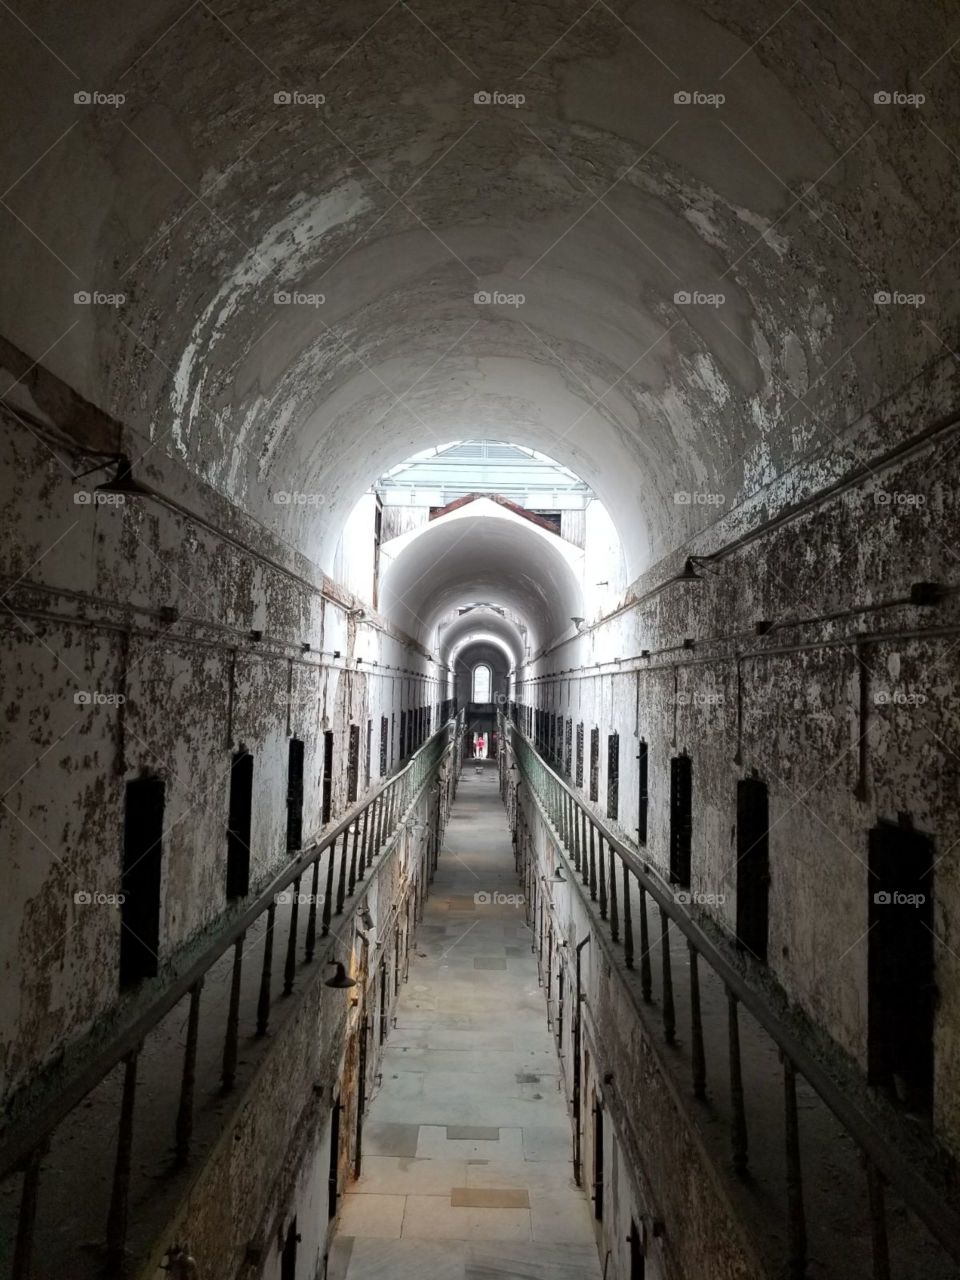 No Person, Abandoned, Architecture, Jail, Building